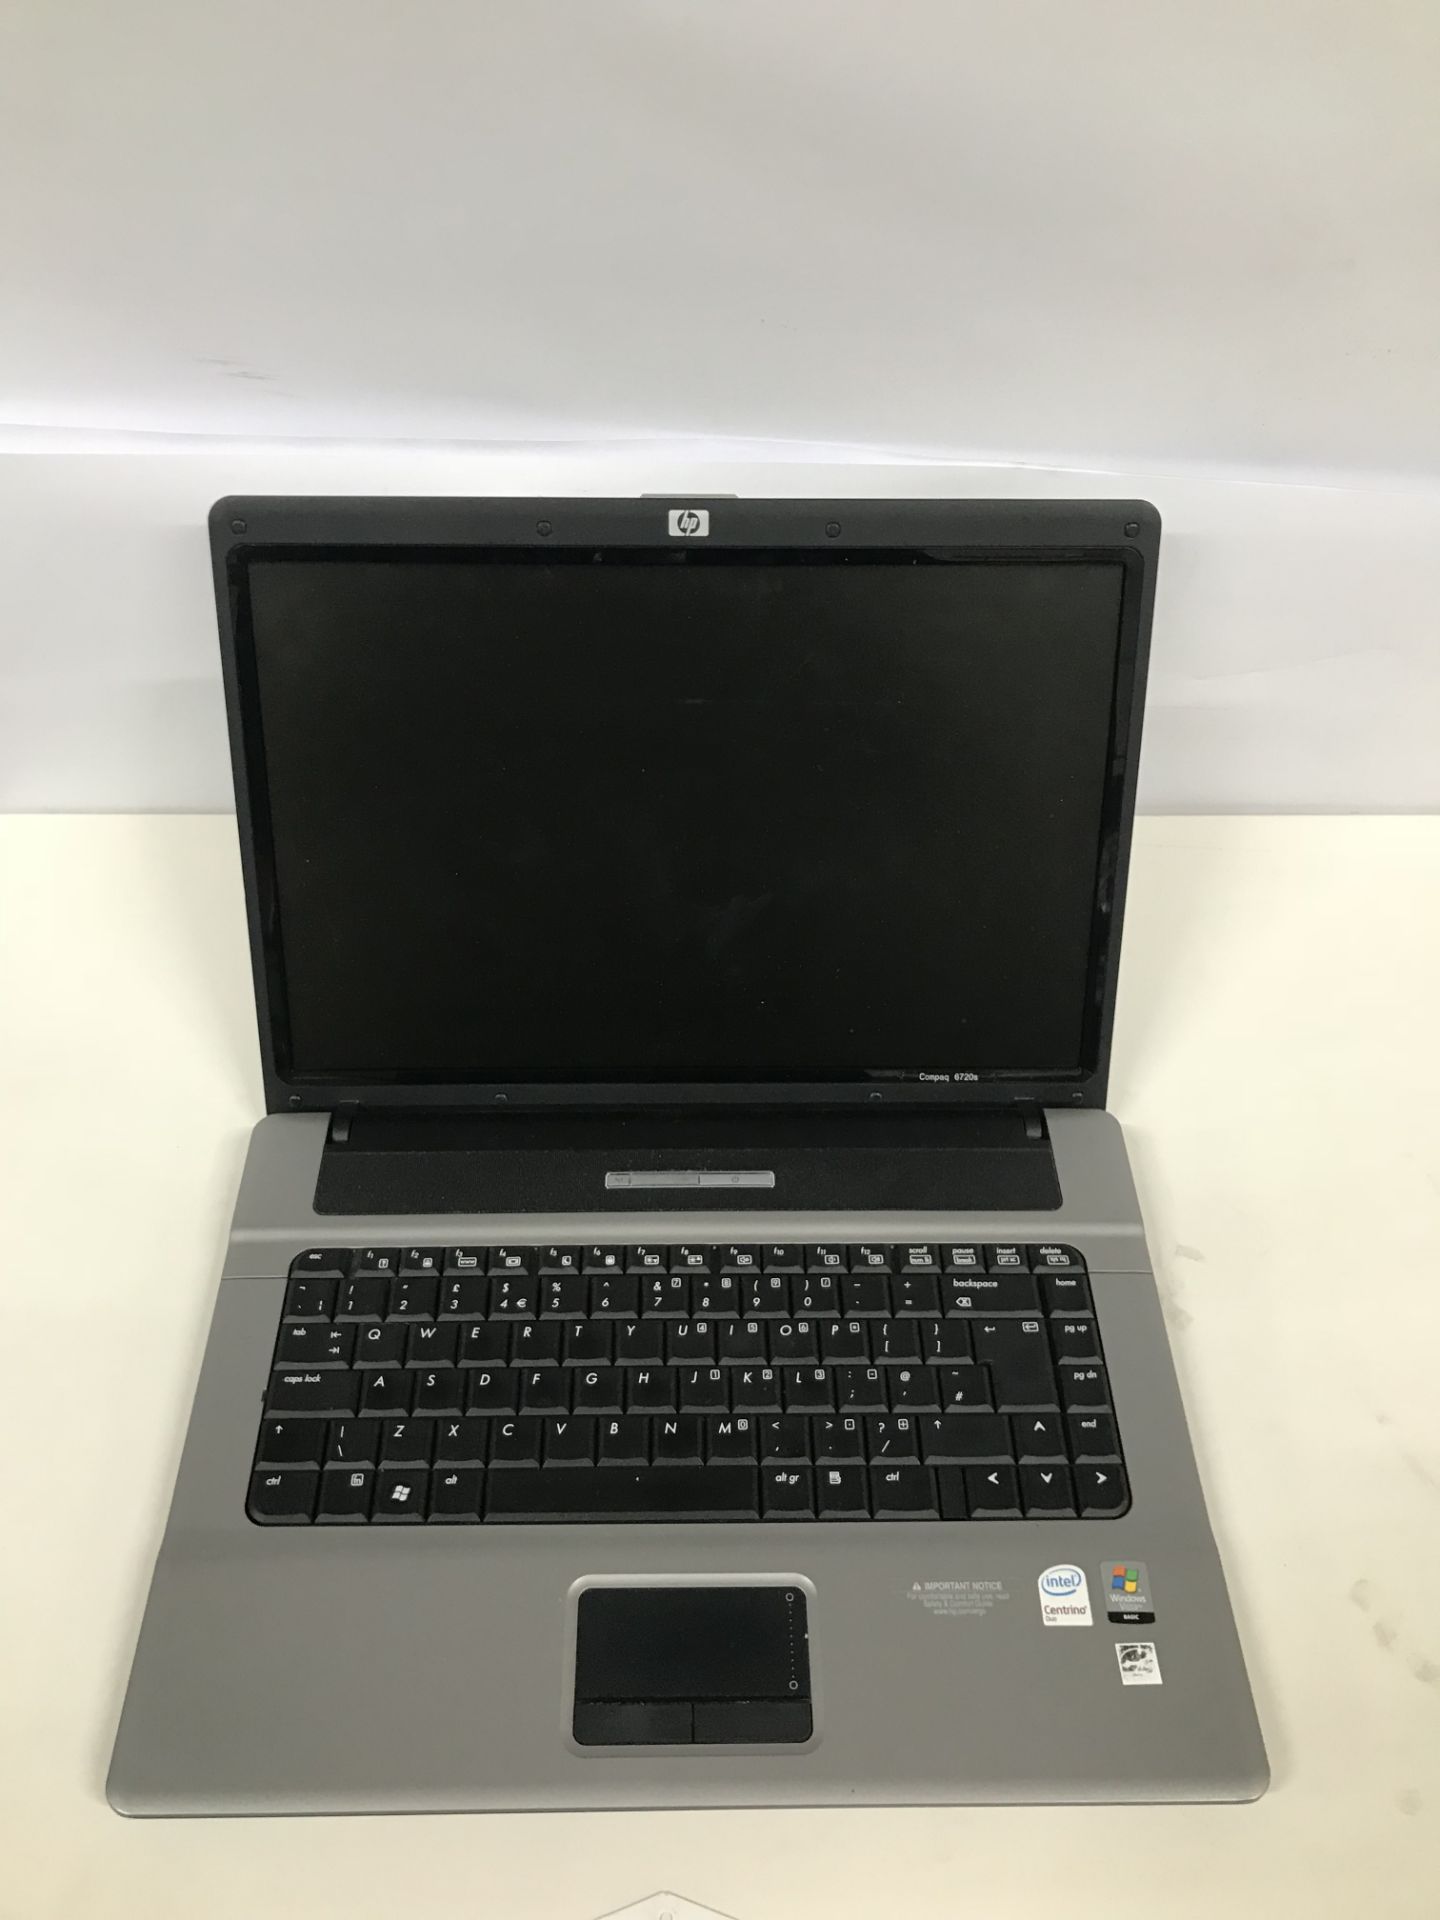 HP Compaq Intel Centrino Duo Laptop (No charger) - Image 2 of 2